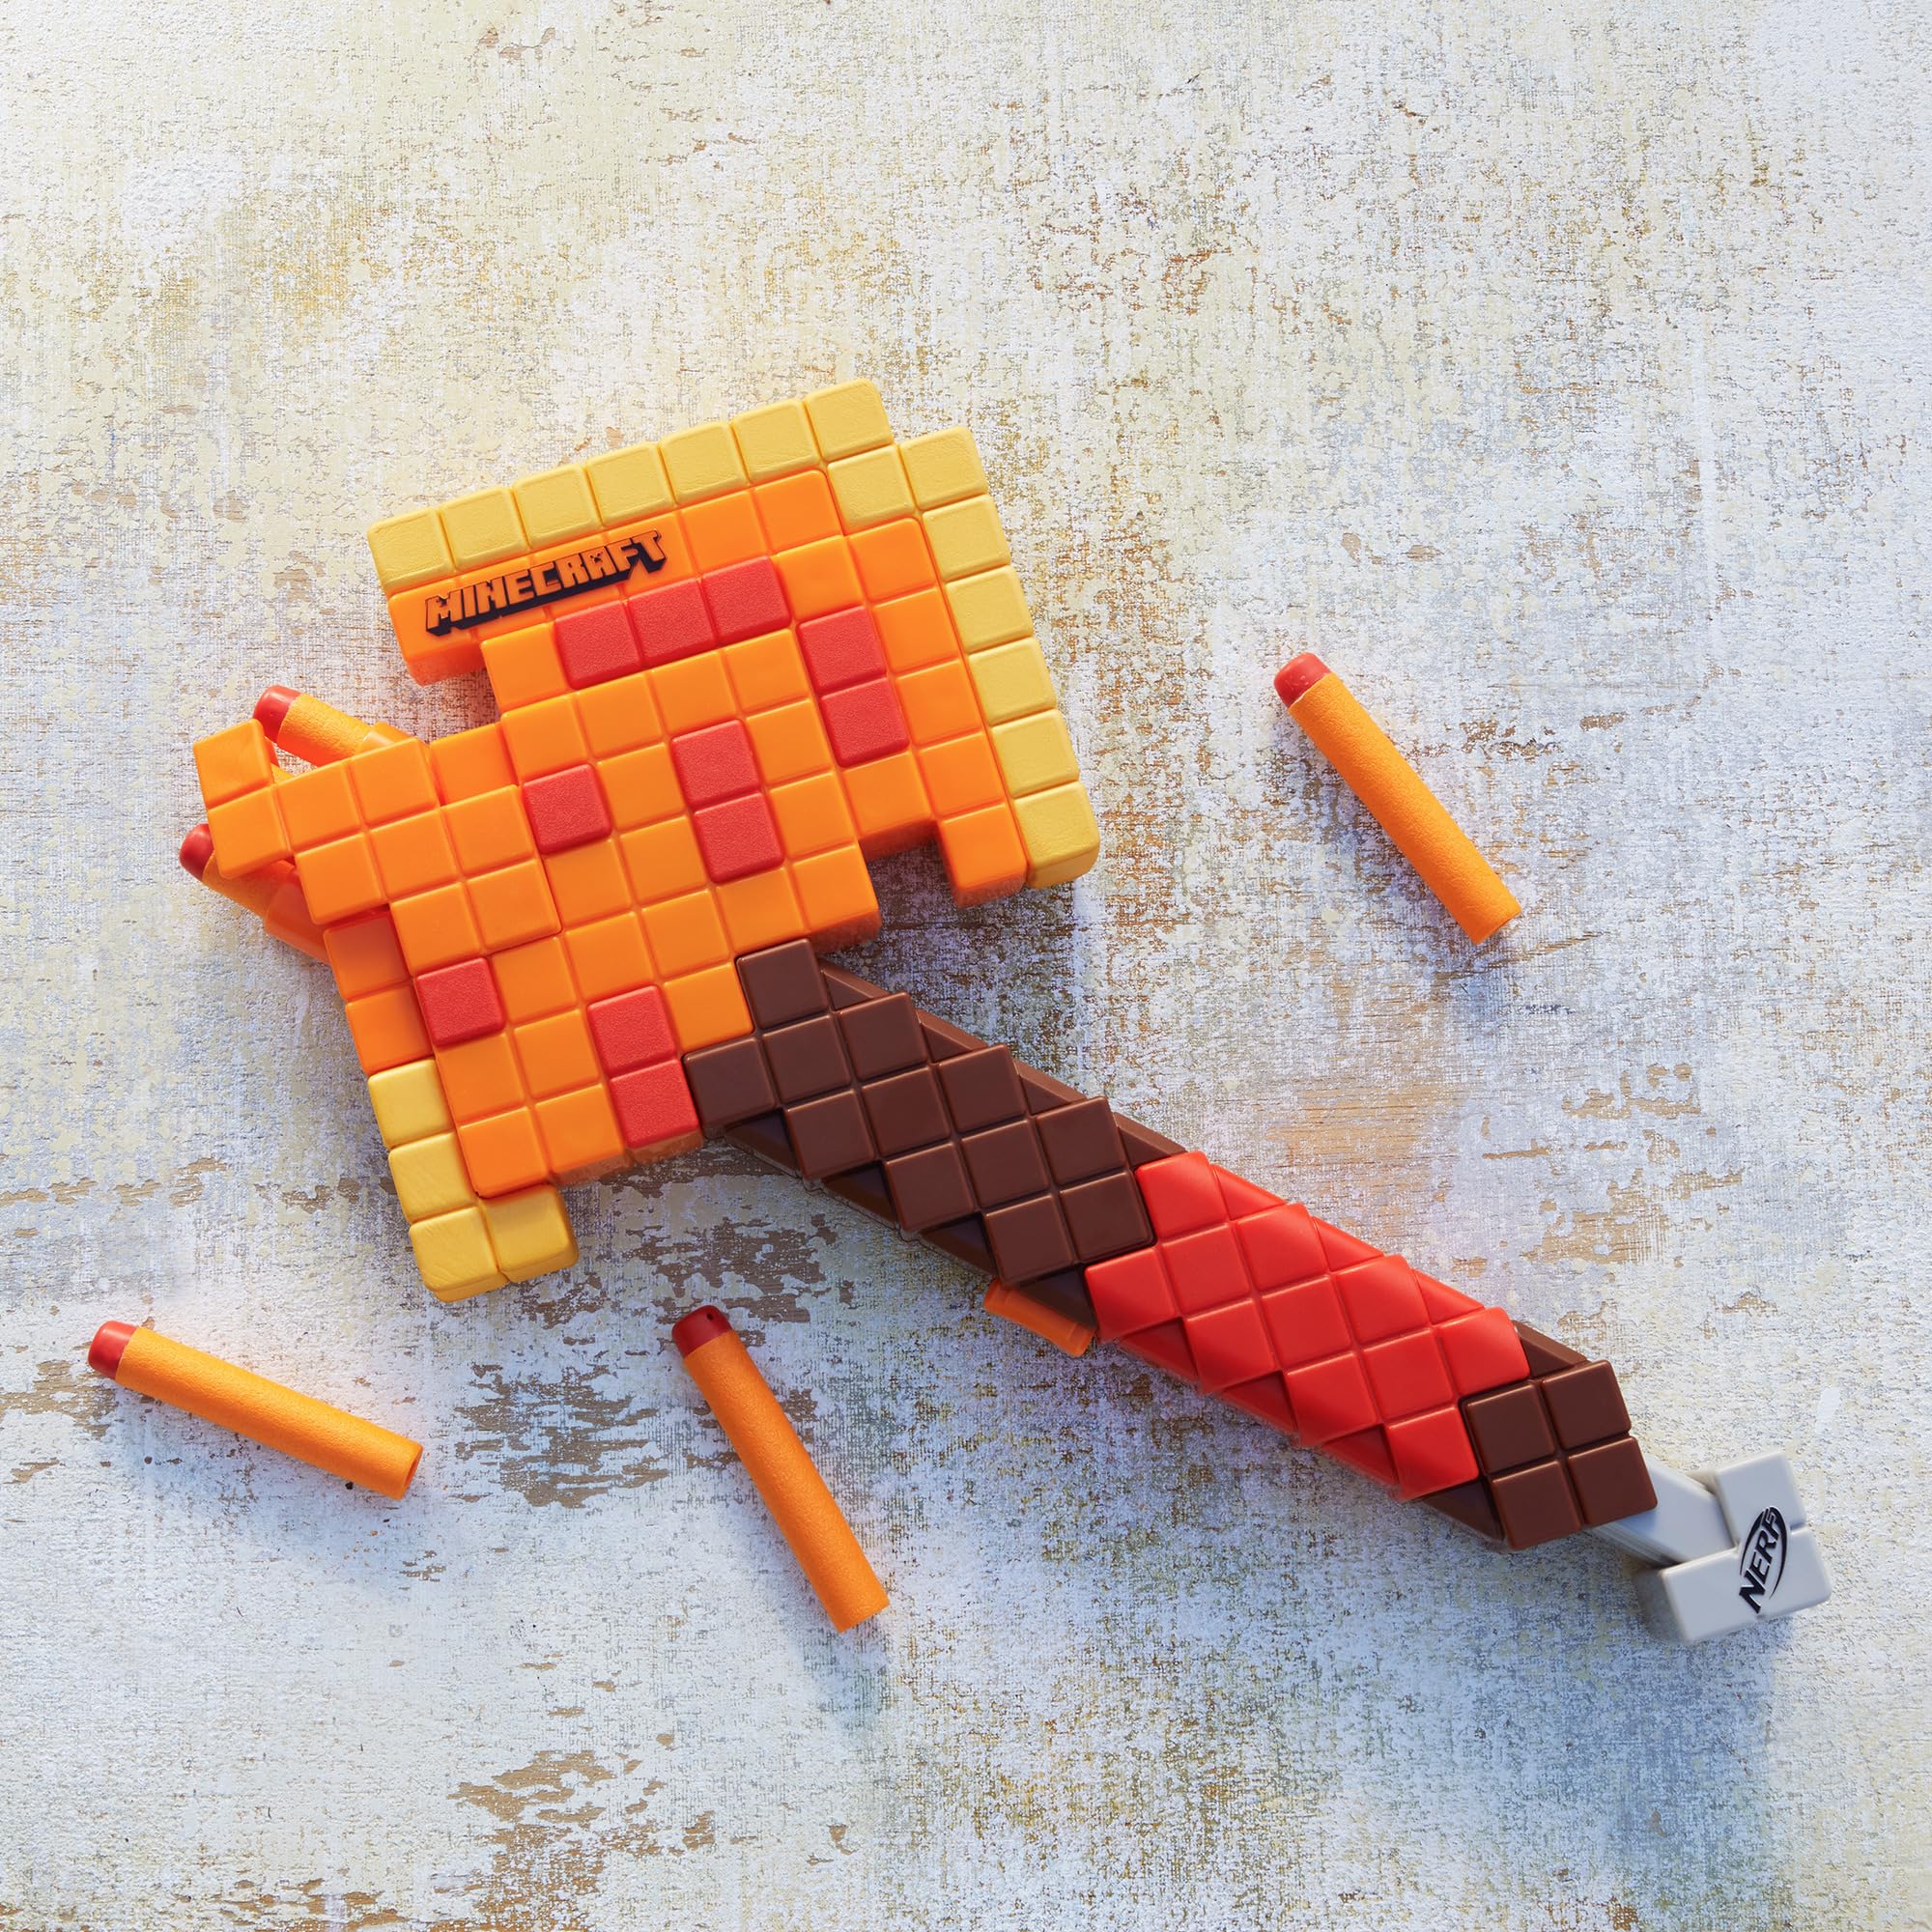 Nerf Minecraft Firebrand, Dart Blasting Axe, 6 Nerf Elite Foam Darts, Design Inspired by Minecraft Axe in The Game, Pull Down Priming, Minecraft Toys